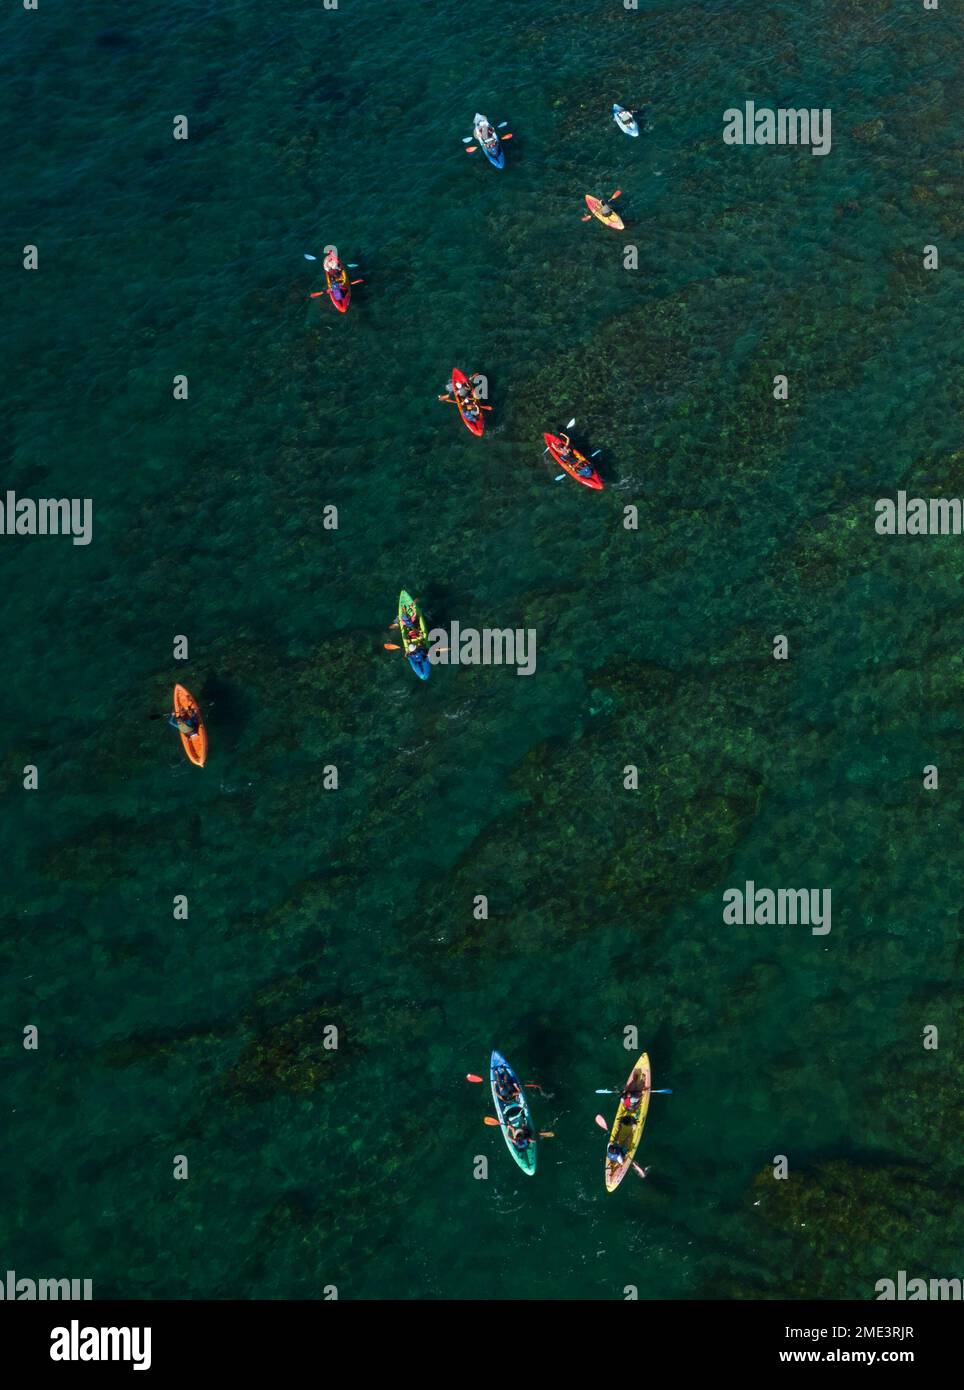 Group of people kayaking in the sea near a white rocky coastline.People active, healthy lifestyle Stock Photo